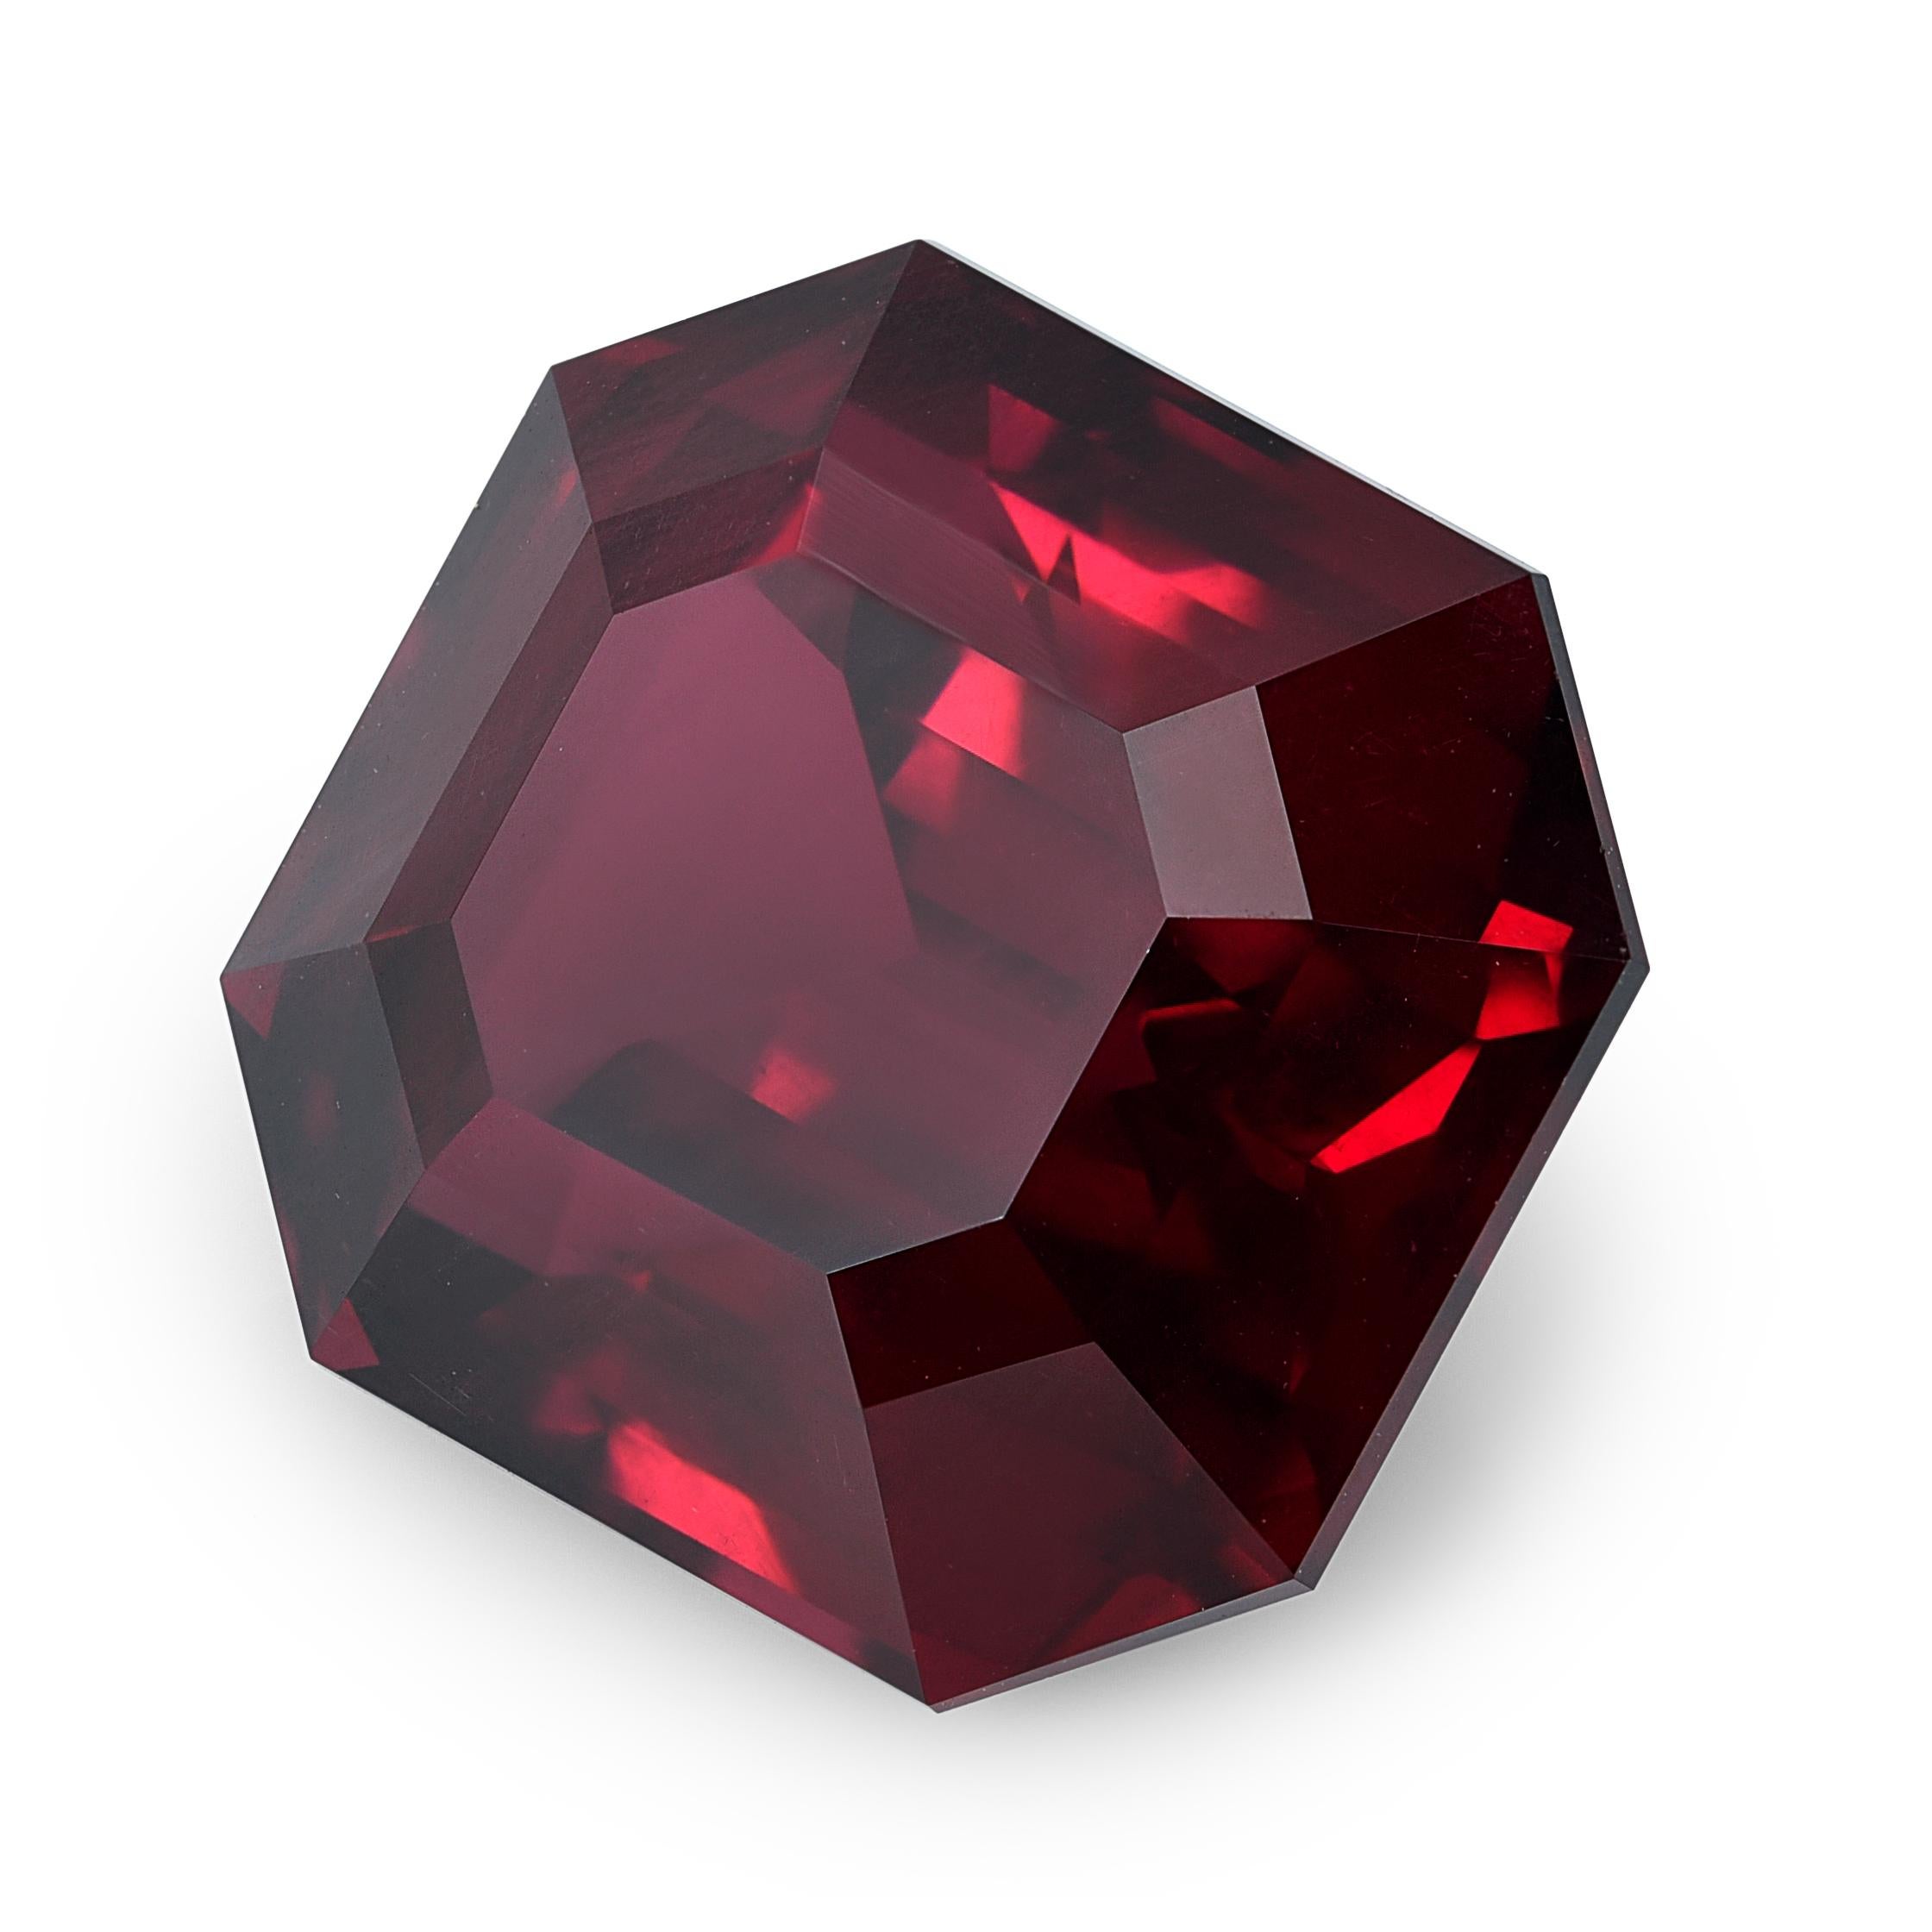 This striking Natural Garnet weighs an impressive 19.91 carats, displaying a captivating red hue. With an octagon shape and dimensions measuring 15.26 x 14.48 x 10.09 mm, this gemstone offers a perfect balance of size and elegance. The deep red